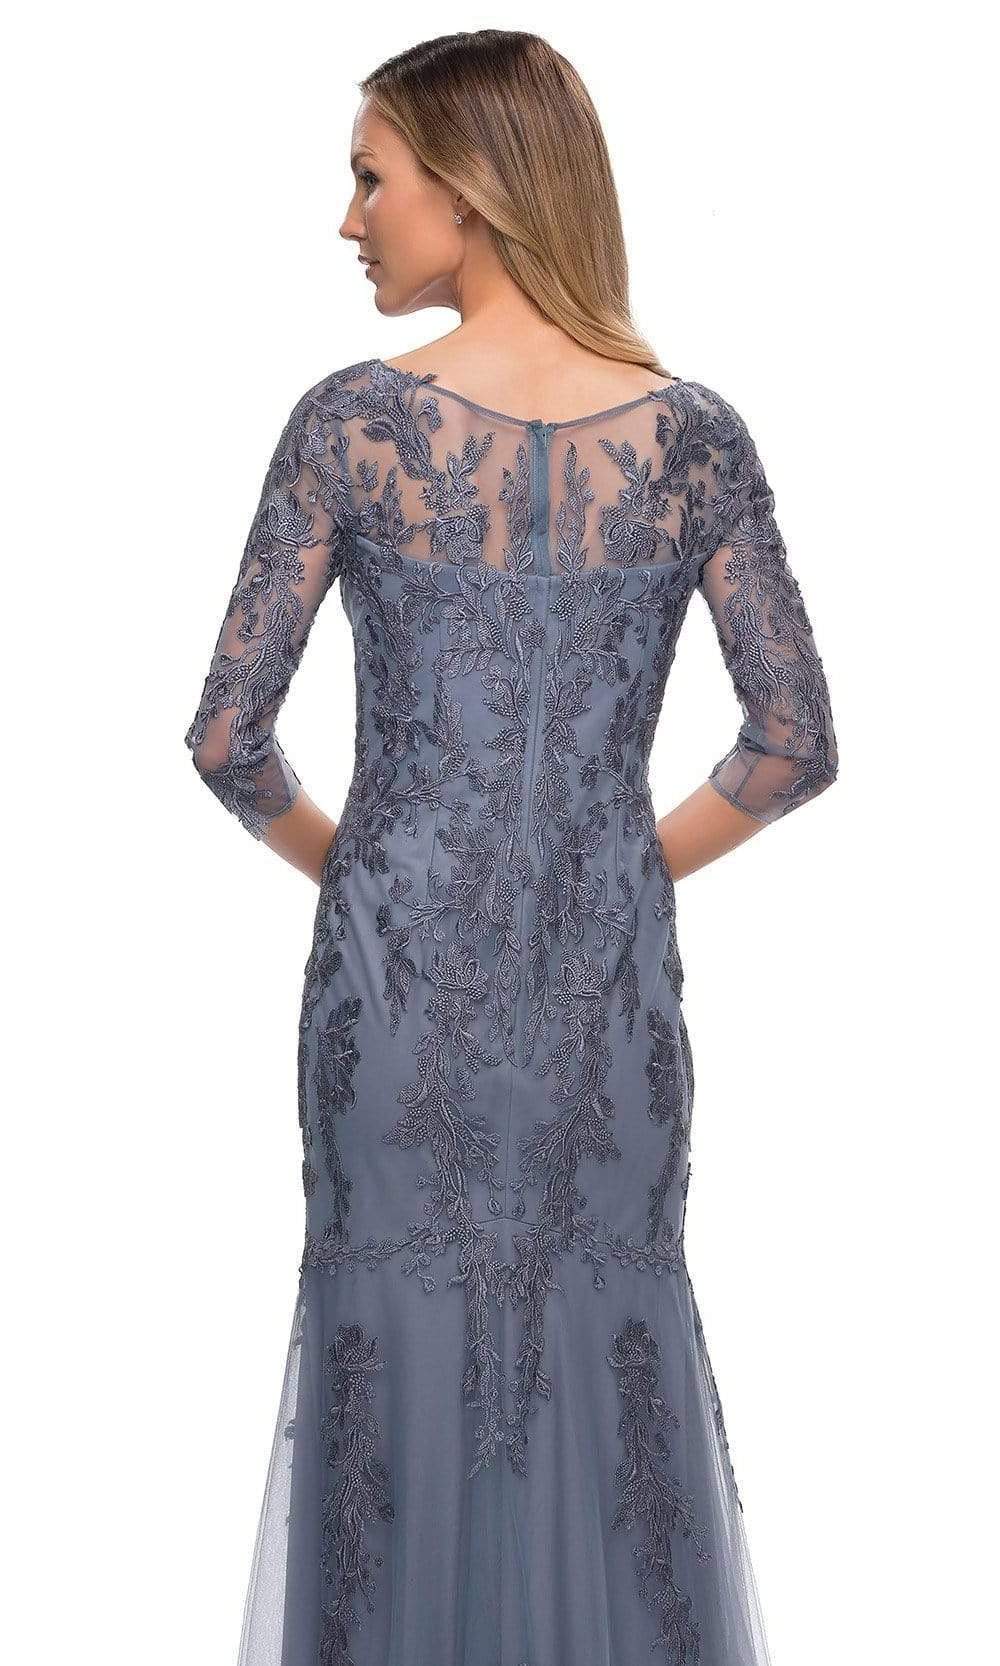 La Femme - 29226 Embroidered Tulle Sheath Gown Mother of the Bride Dresses